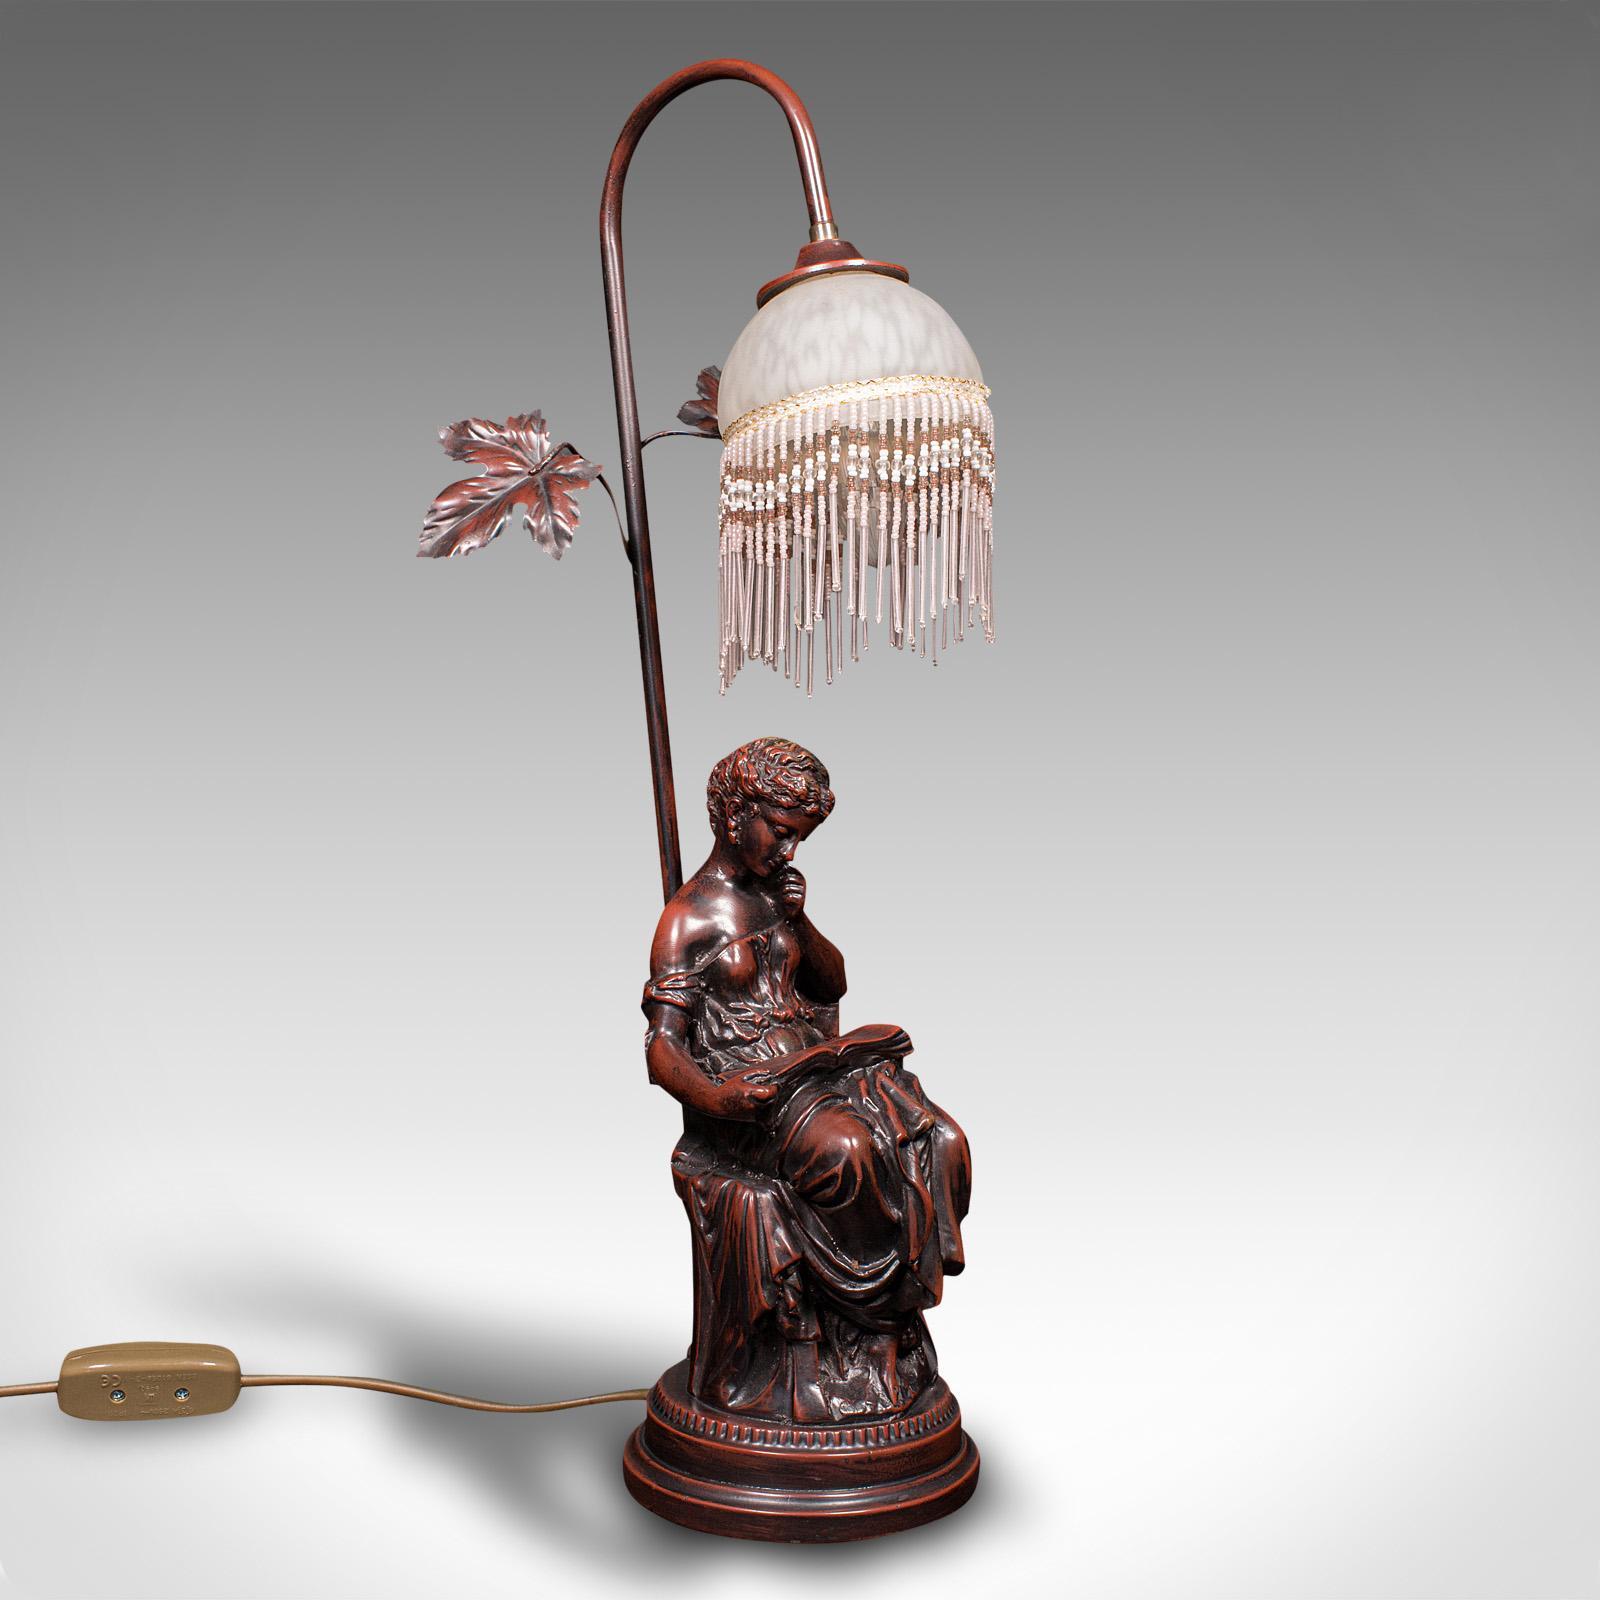 This is a vintage decorative lamp. A French, bronzed composite female figural table light in Art Nouveau revival taste, dating to the late 20th century, circa 1980.

Traditional sensual charm to this distinctive table lamp
Displays a desirable